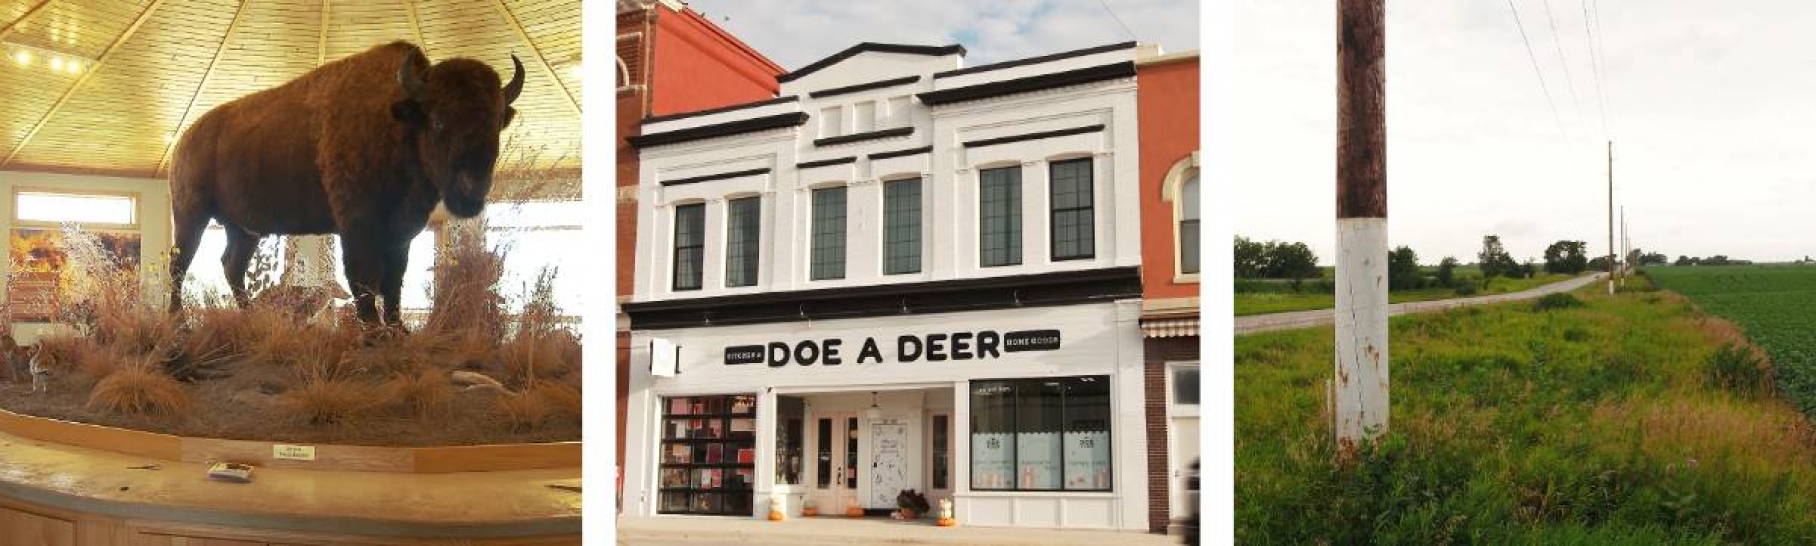 Three photos from L-R: A buffalo in a museum, a white storefront building with the words "Doe A Deer" above the door and an image of a white painted telephone pole along a rural Iowa road